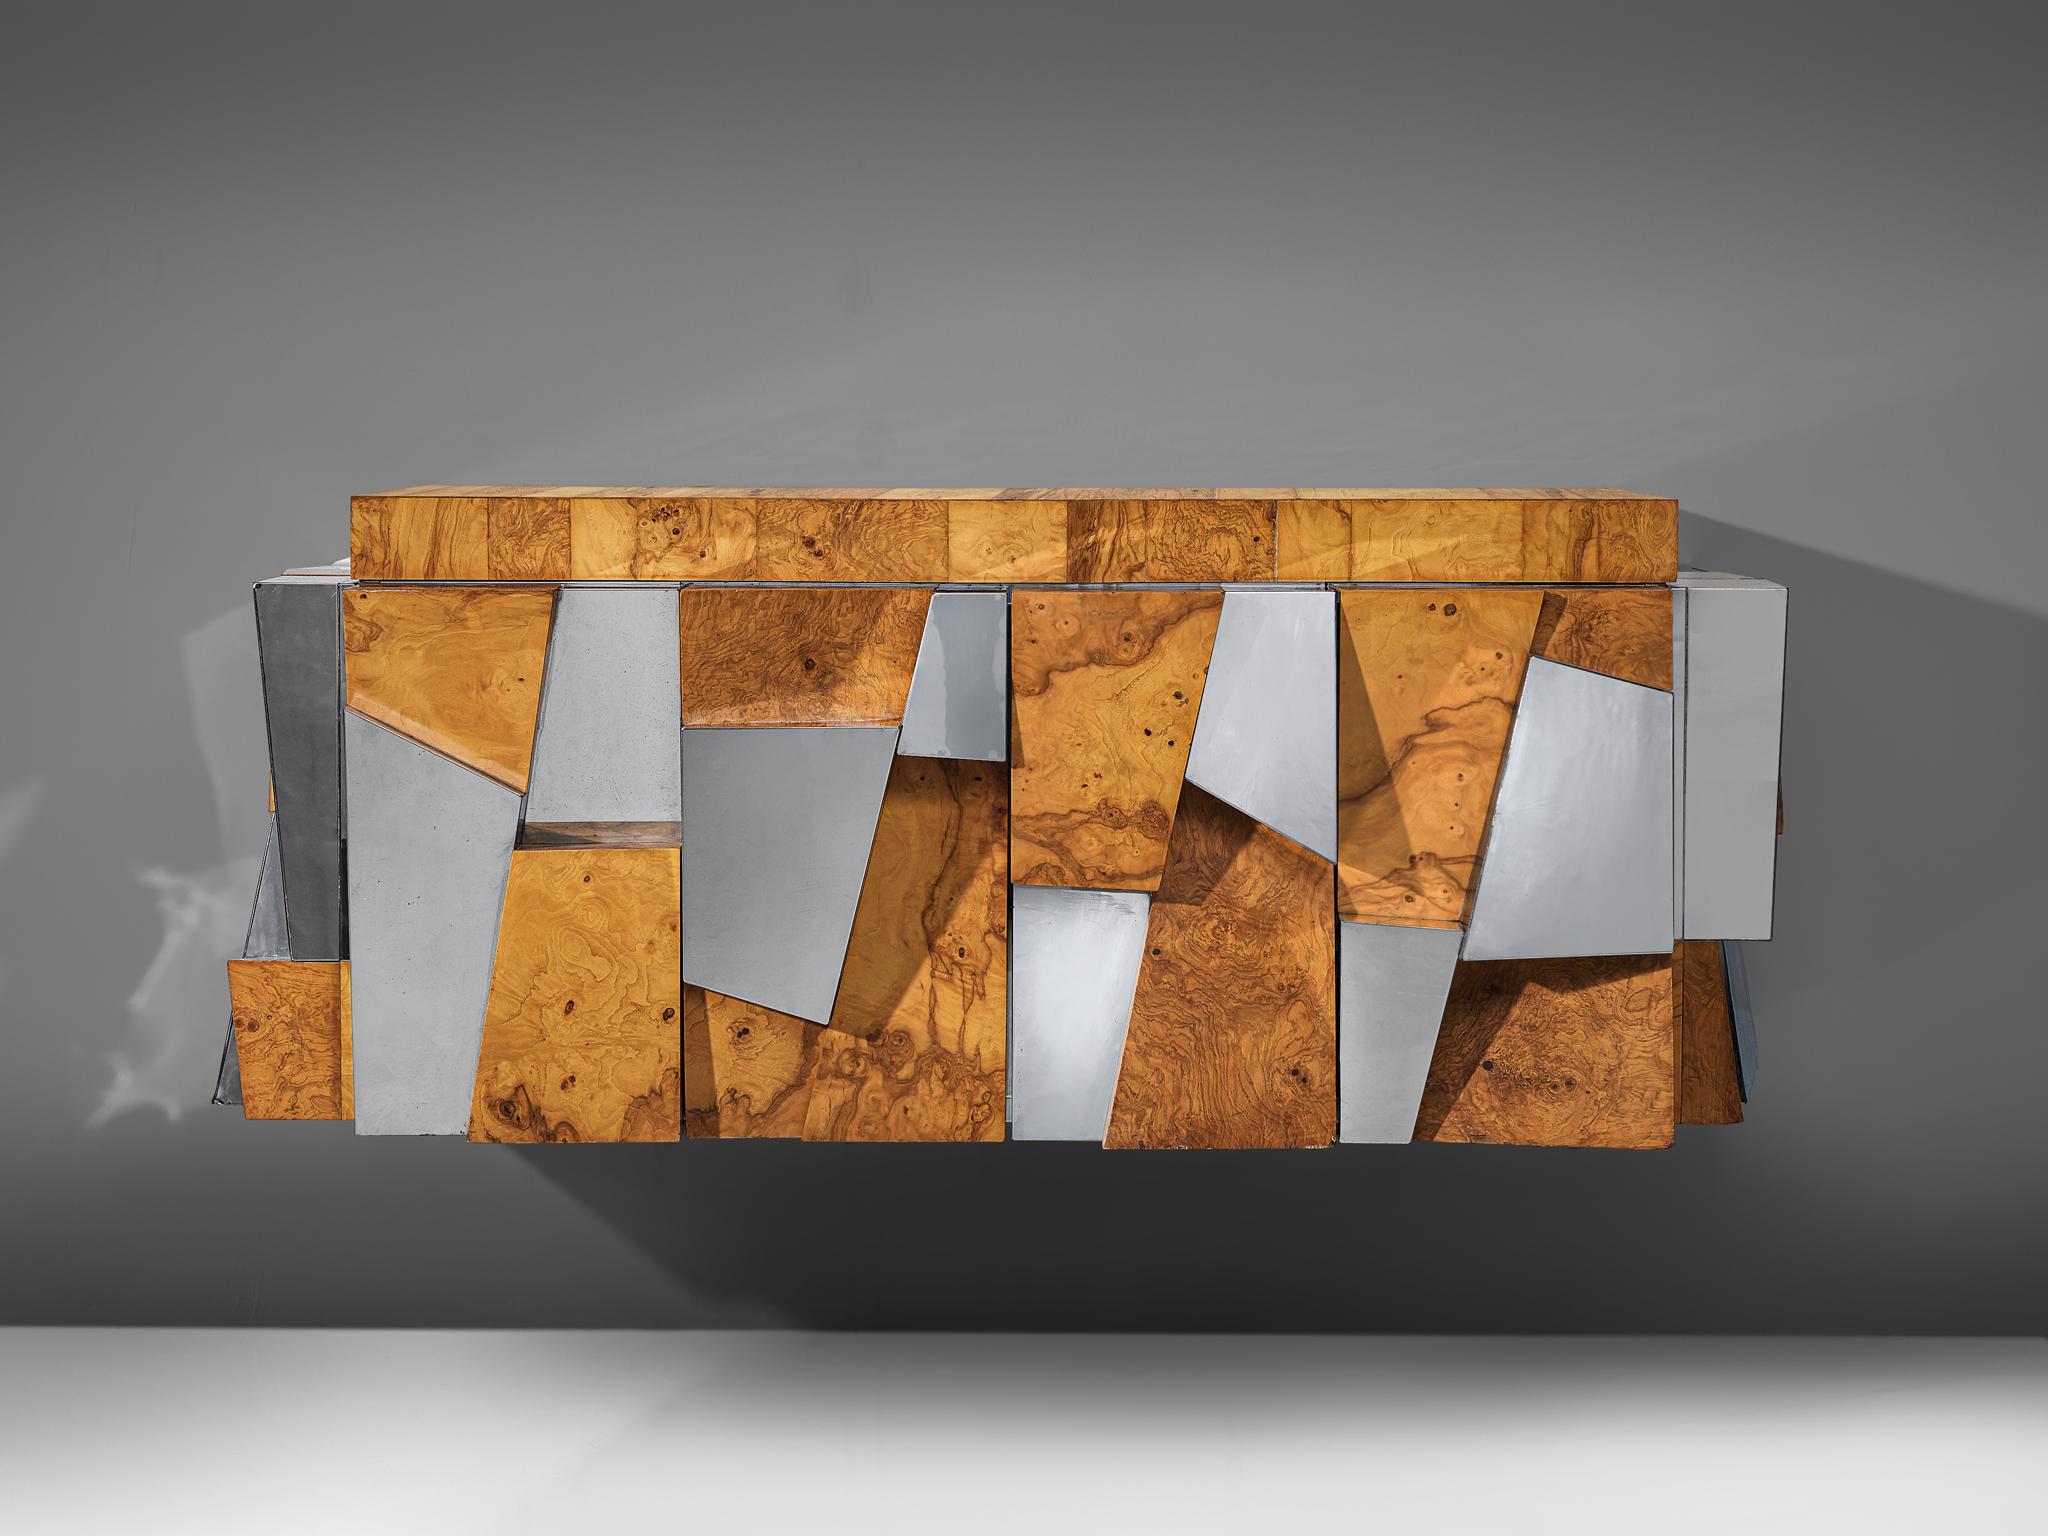 Paul Evans for Directional, 'Faceted' wall-mounted cabinet, chromed steel, olive ash burl, glass, United States, 1970s

A beautiful wall-mounted sideboard by Paul Evans for Directional. The piece is an excellent example of how Evans’ Cityscape